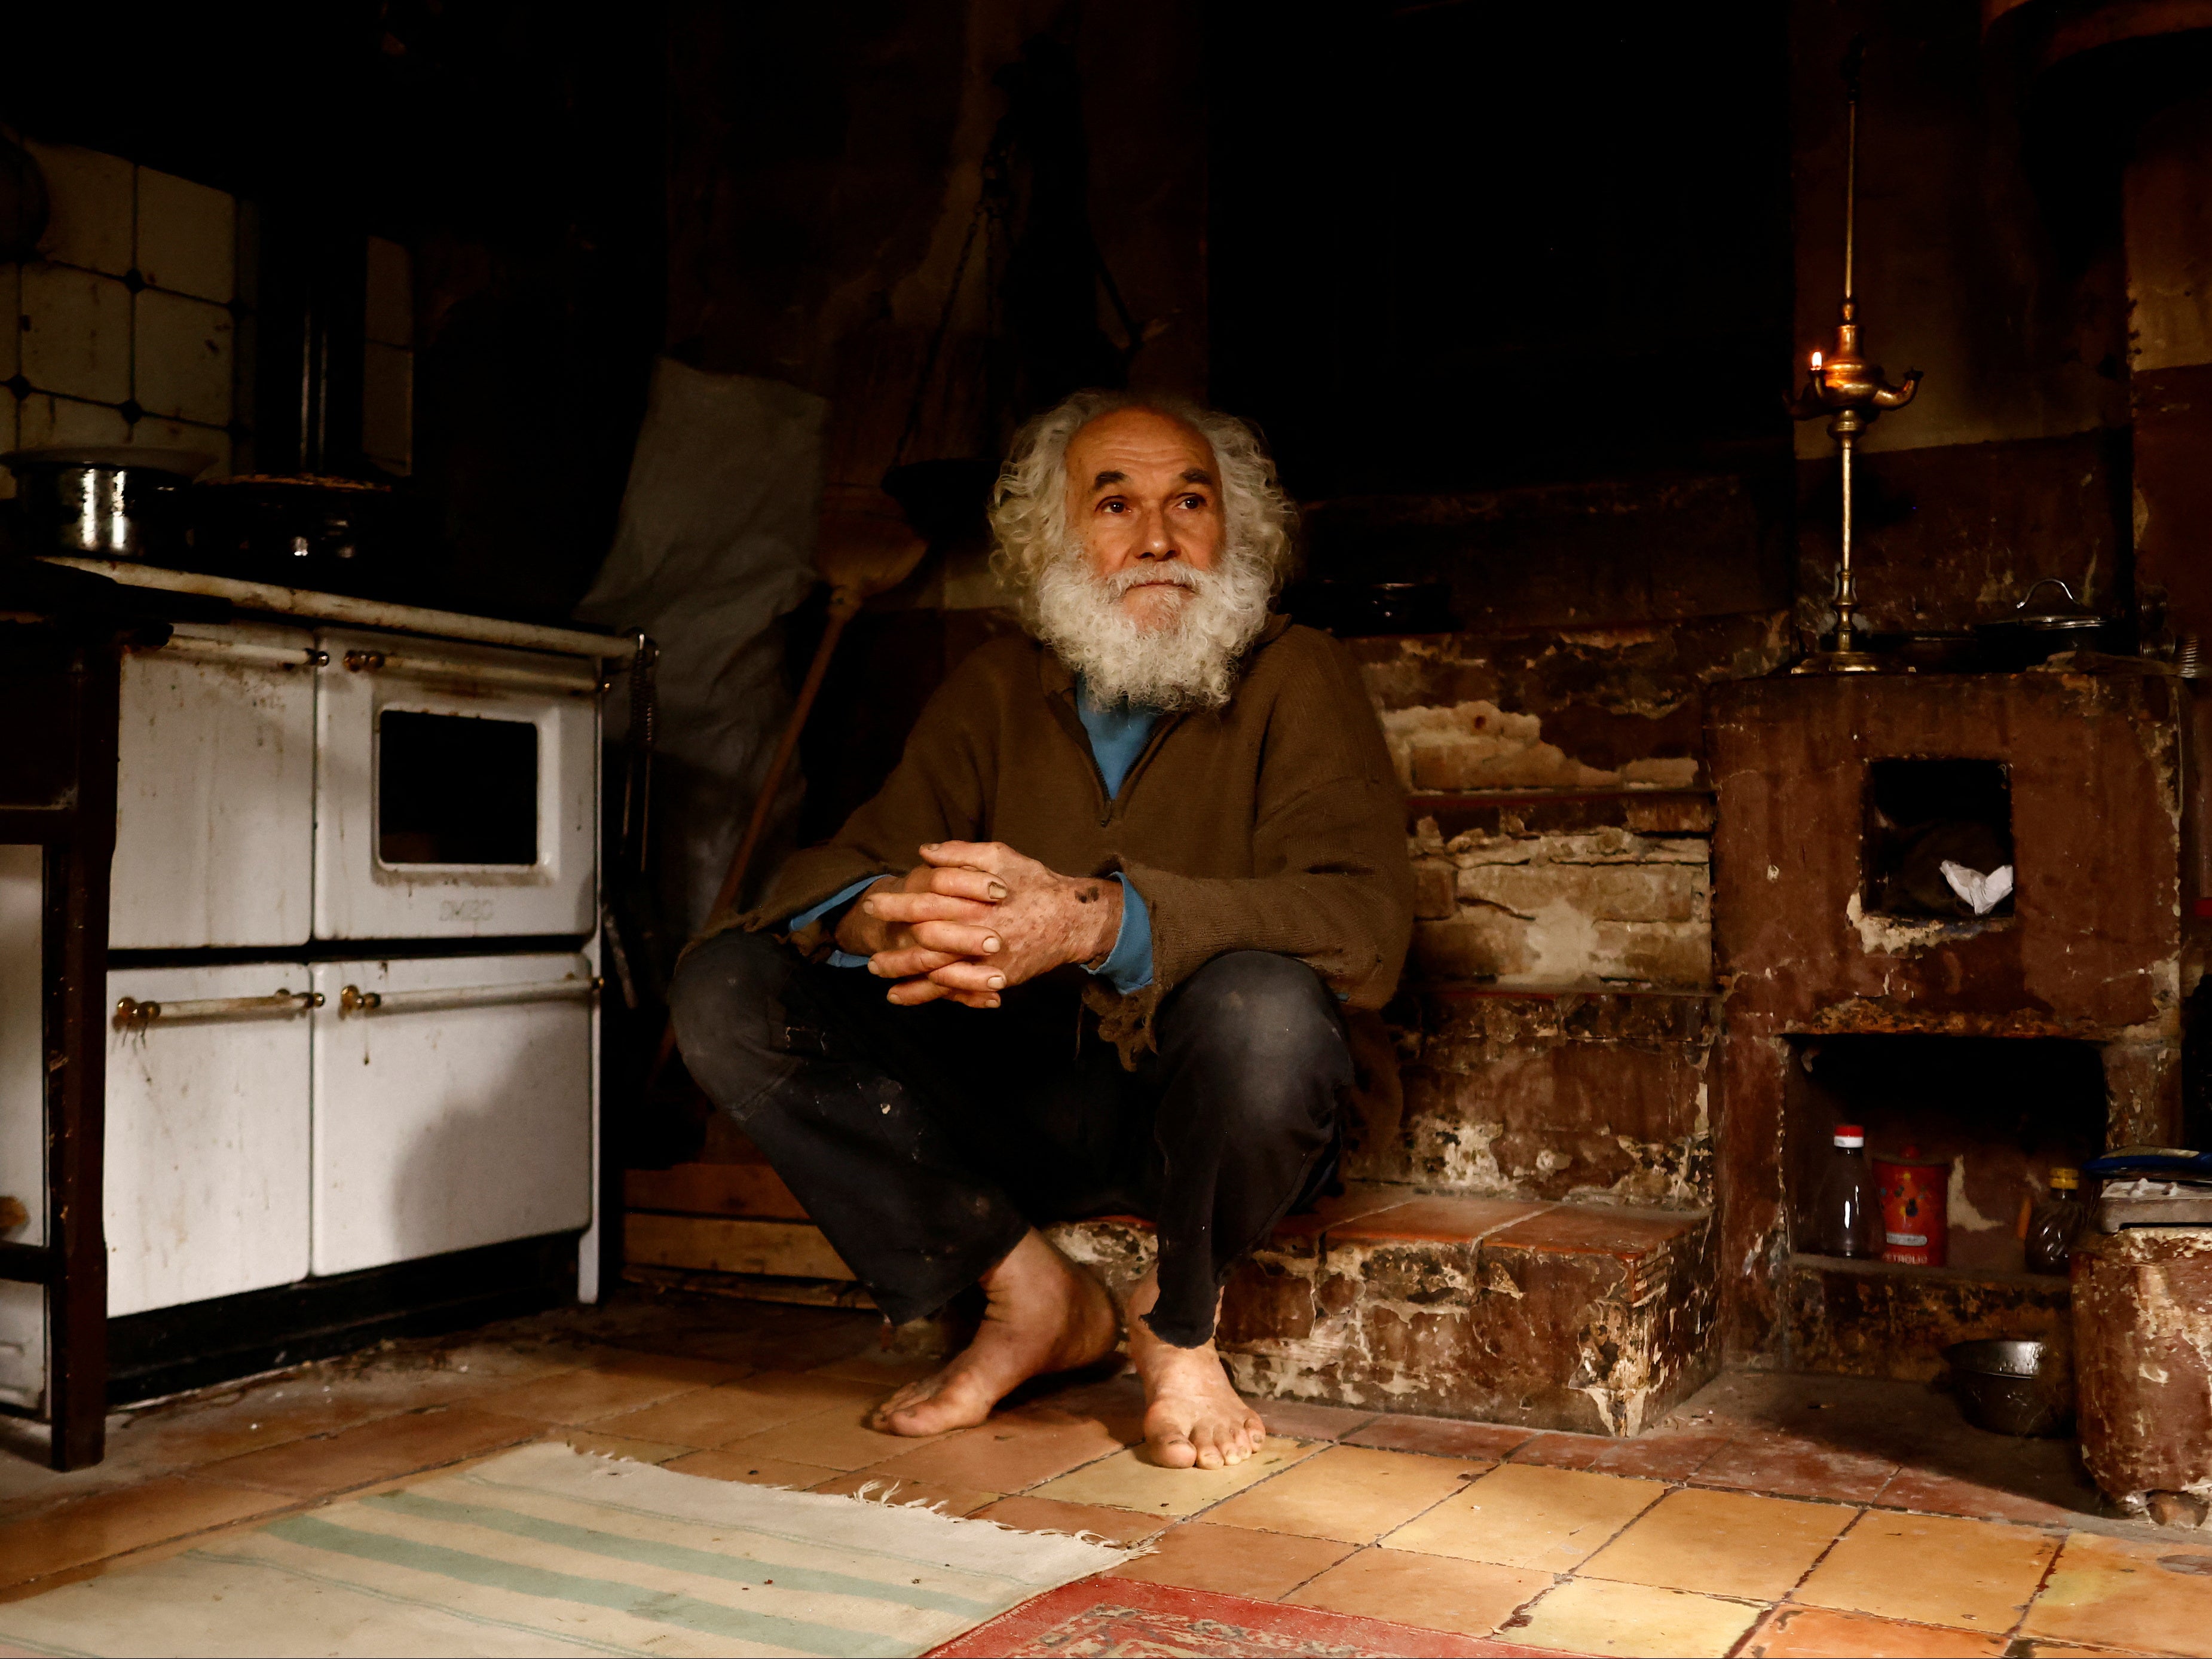 Fabrizio Cardinali sits on the stairs at his home in the woods of the small town of Cupramontana, Ancona, Marche, Italy